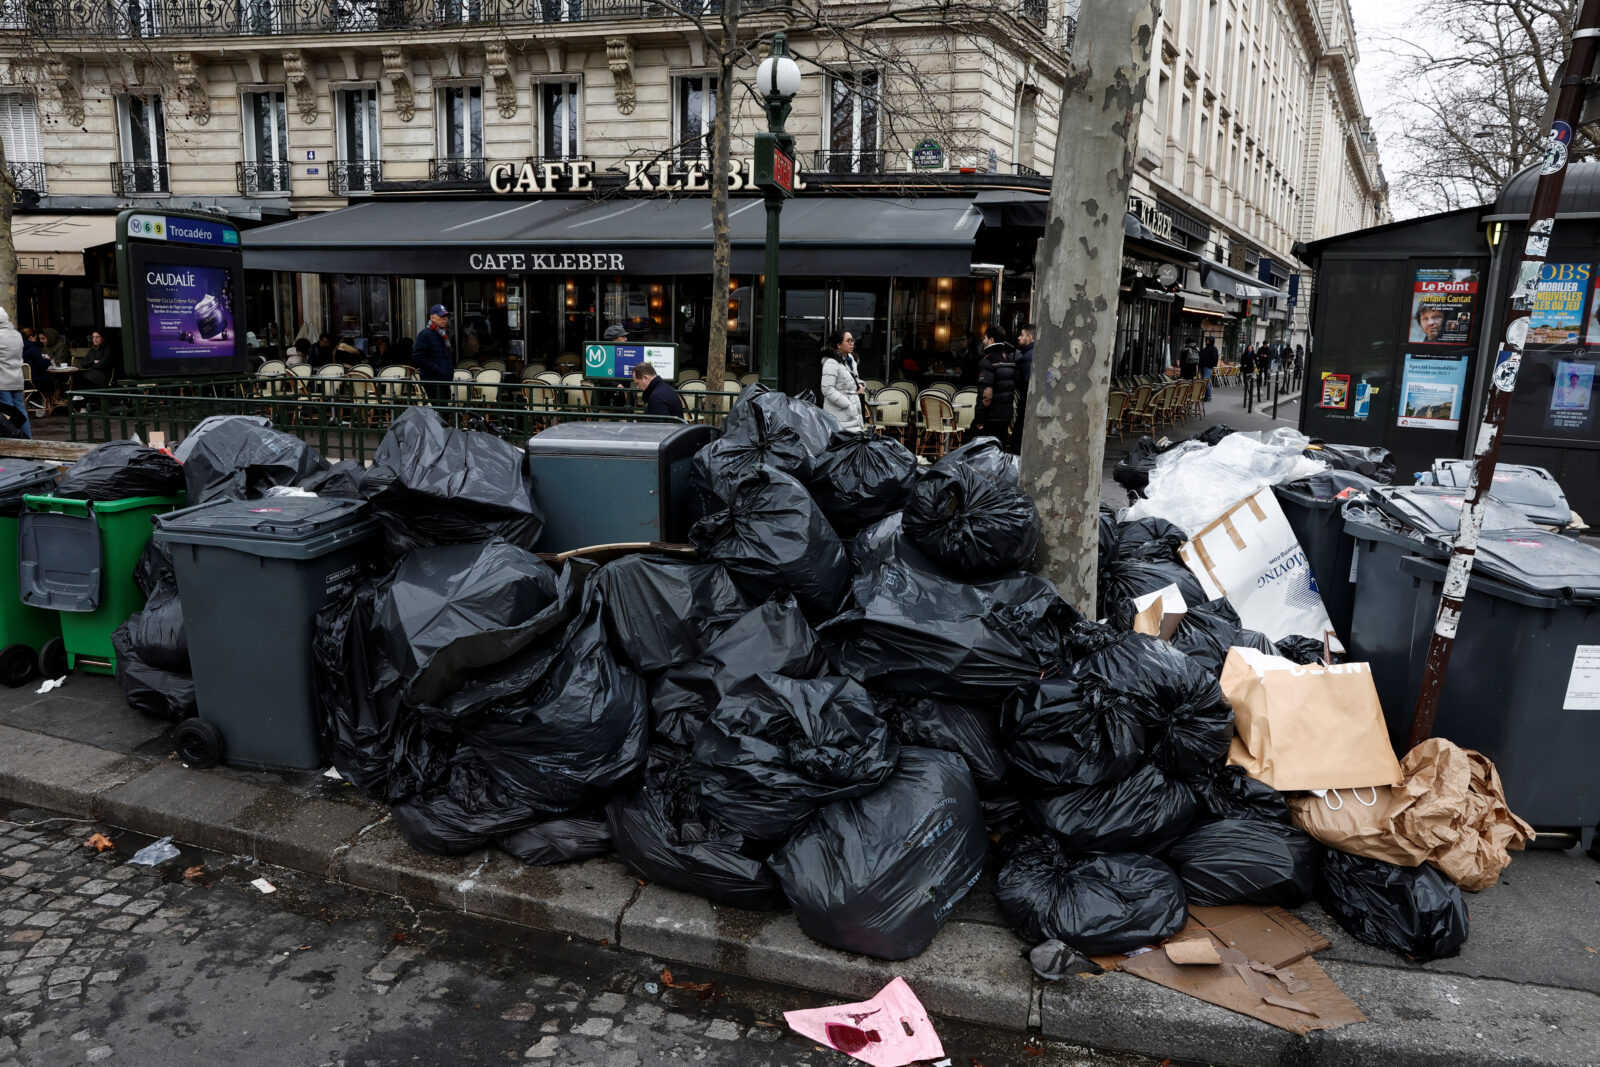 Garbage piles up in Paris as strikes continue over pension reform